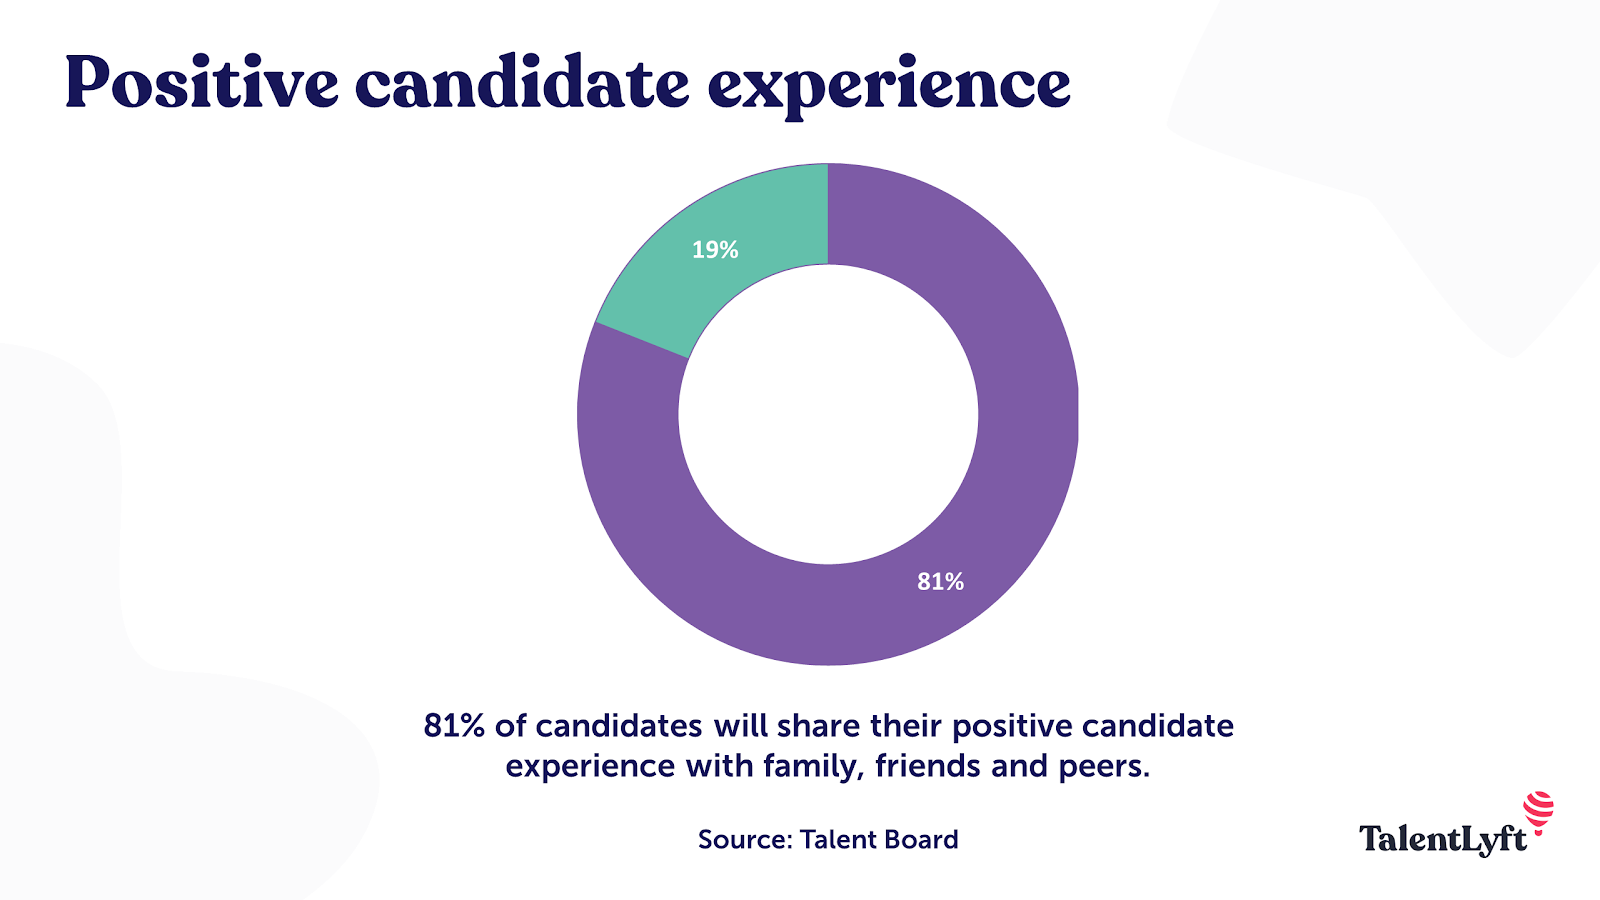 Positive candidate experience even for rejected candidates